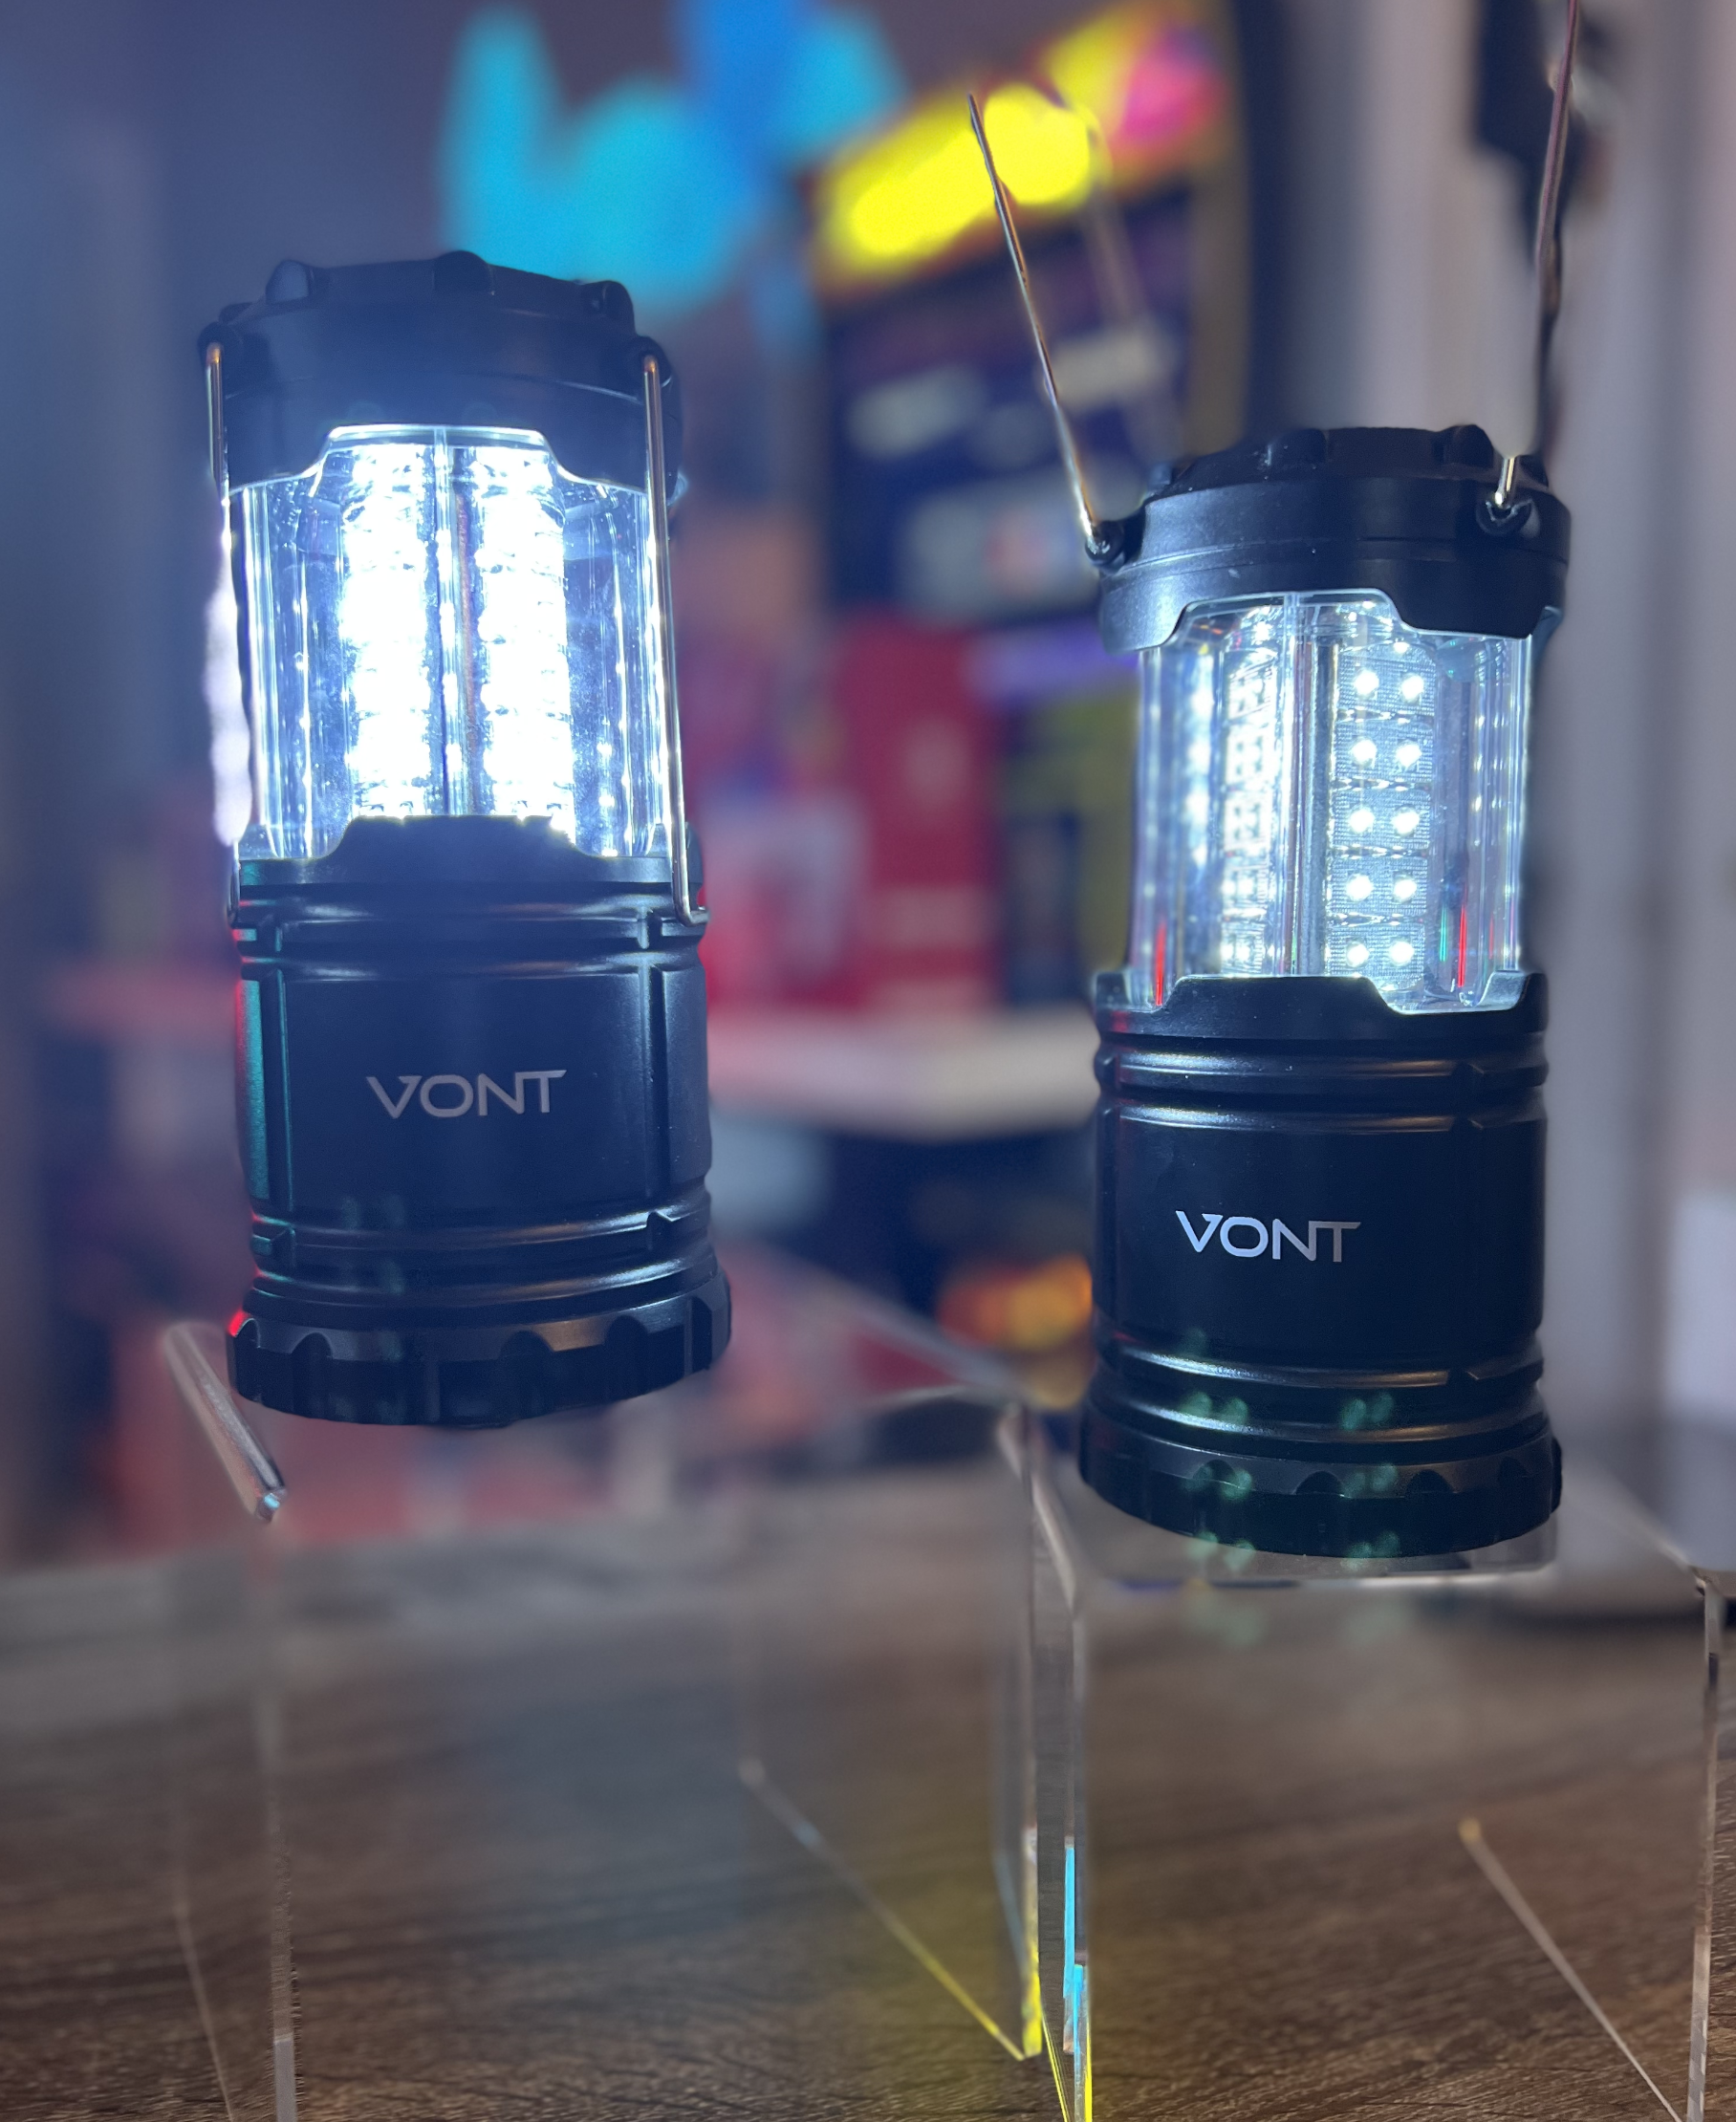 These Vont lanterns are a must for any home Emergency kit. — The Parent Game